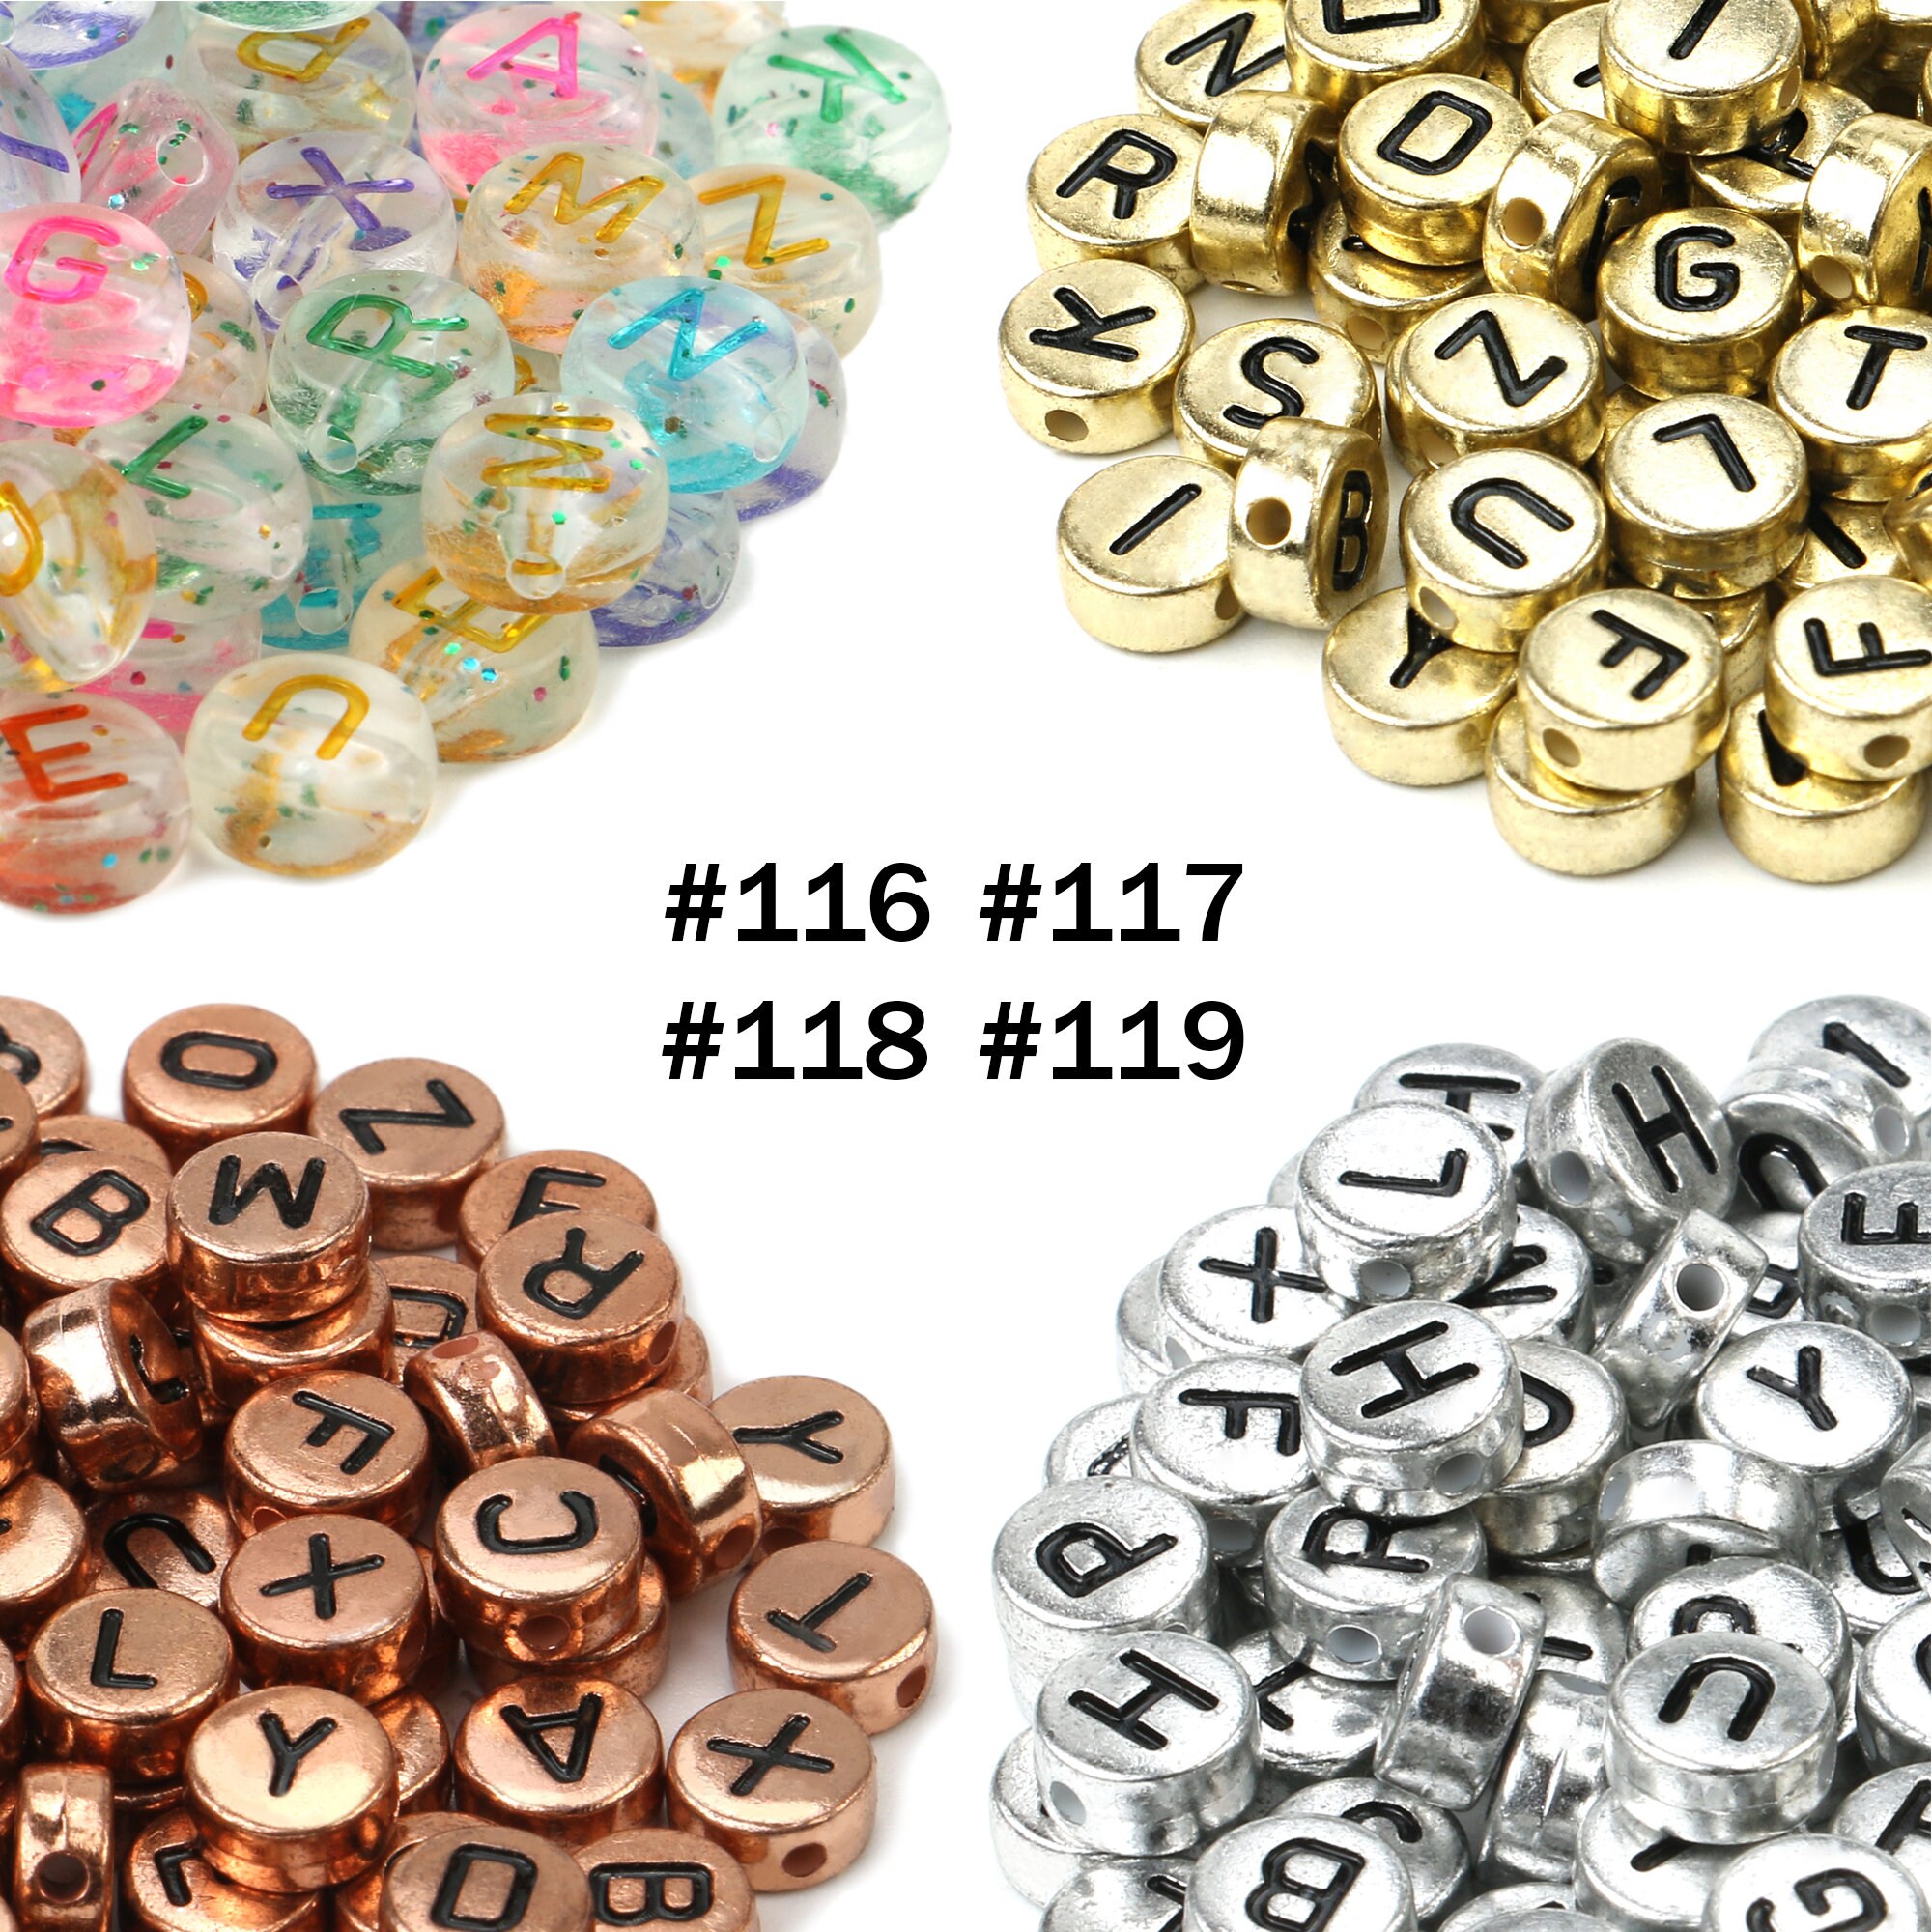 100/200/500pcs 8x9mm White Gold Color Acrylic Letter Beads Two Hole Flat  Square Beads For